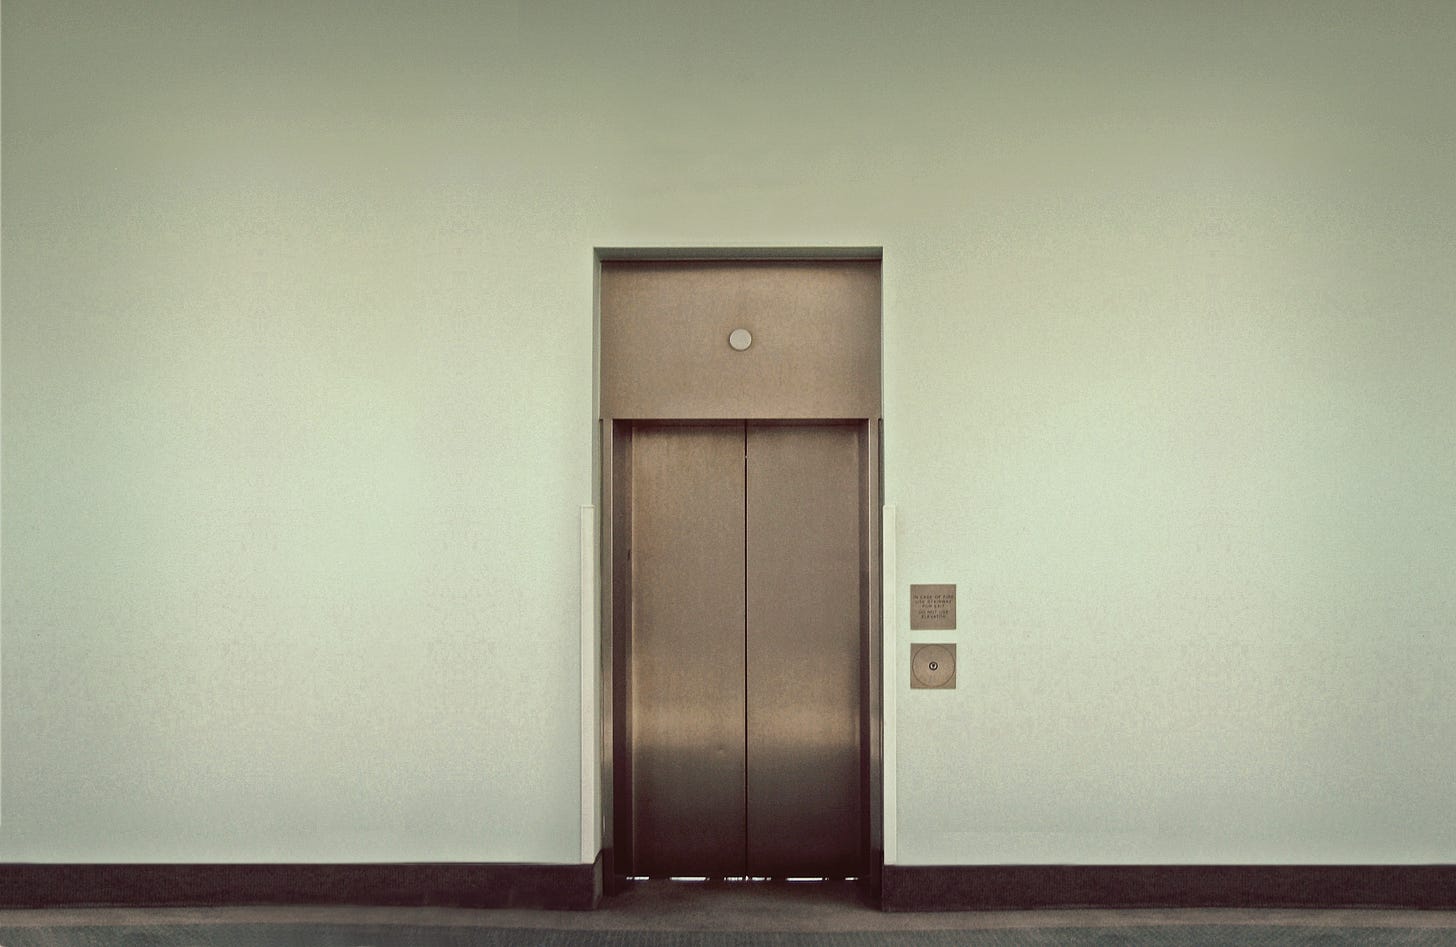 Closed metal doors of an elevator in a large white wall